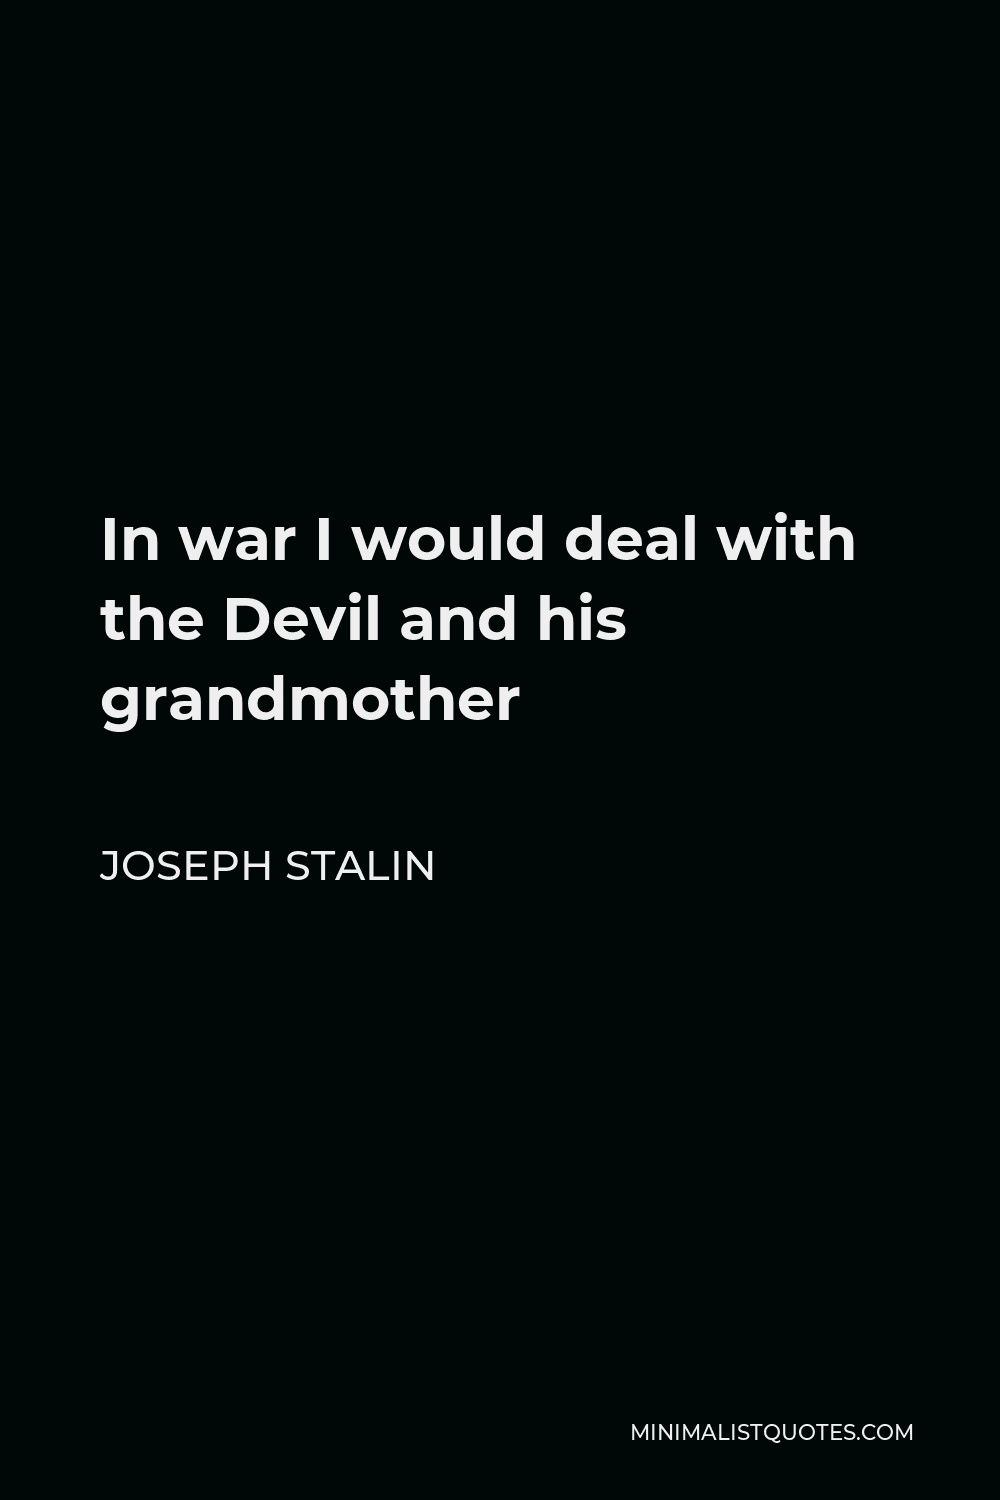 Joseph Stalin Quote - In war I would deal with the Devil and his grandmother